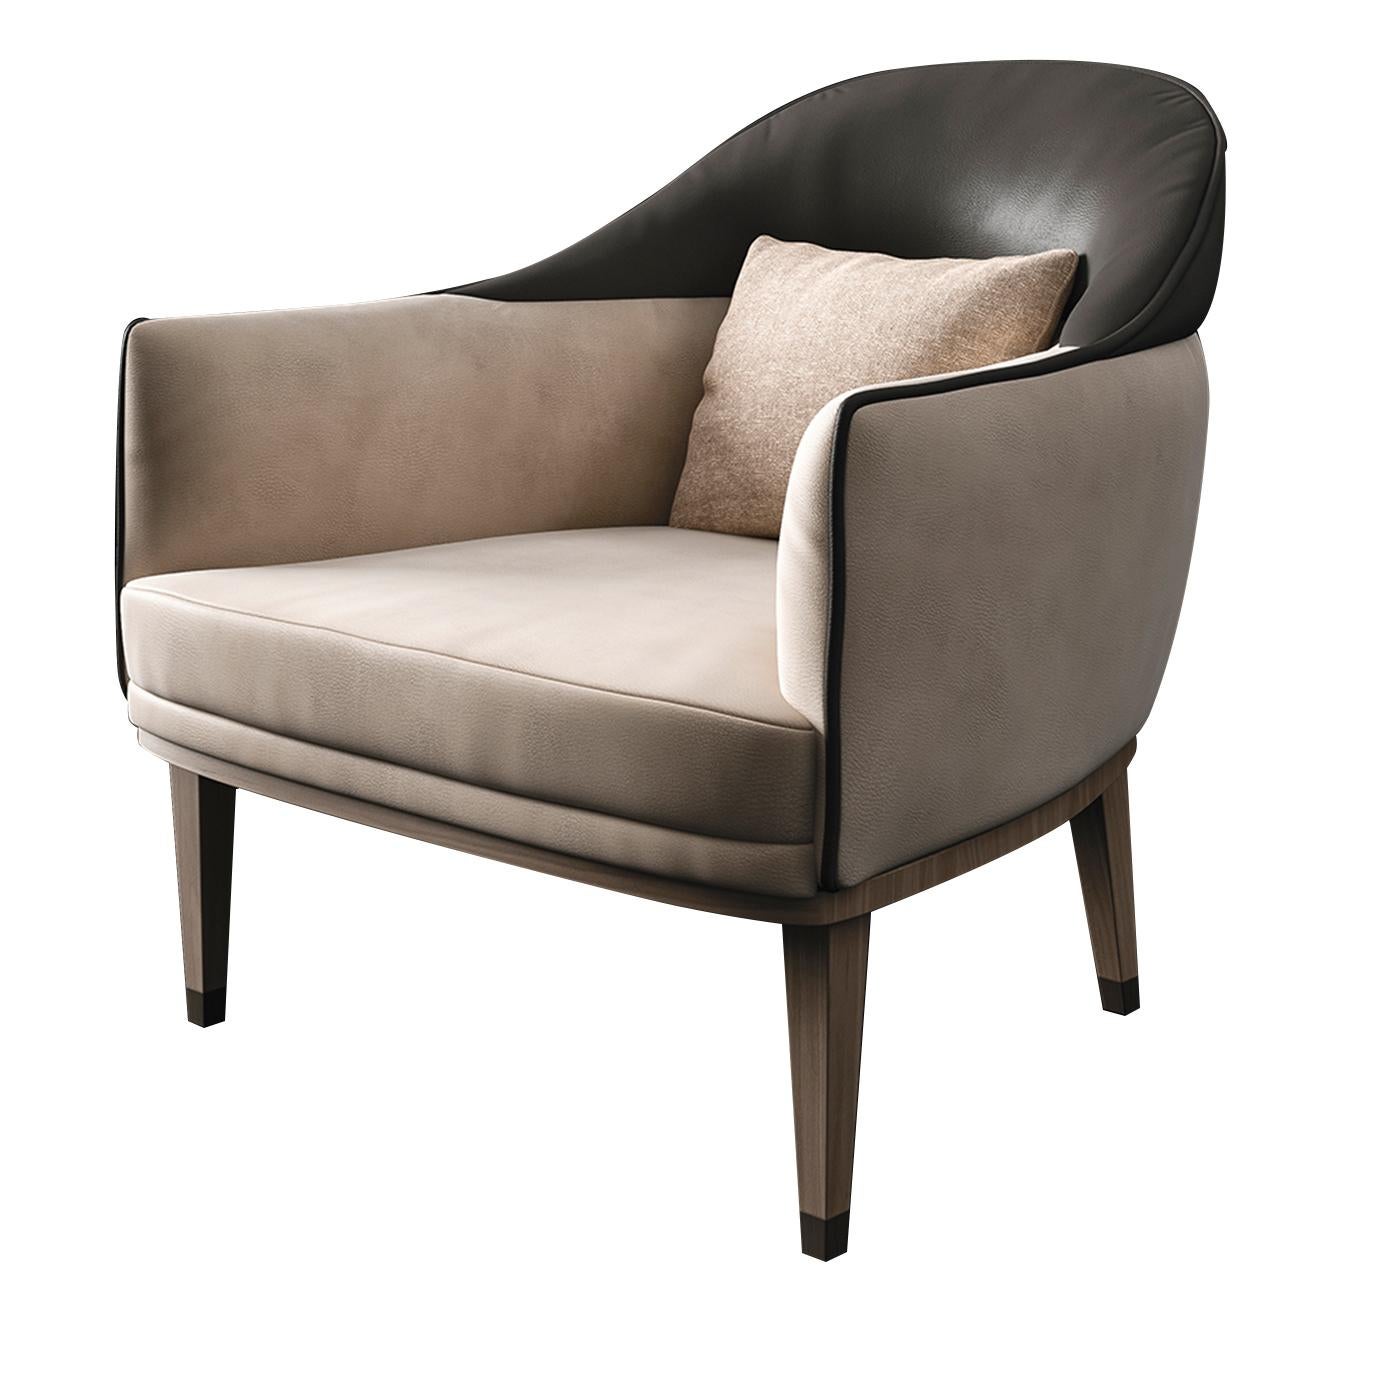 The occasional armchair has a rounded, enveloping design that provides profound comfort and relaxation. With a base crafted from wood, it features nubuck upholstery the lower half of the chair and armrests in a neutral beige and the top part of the